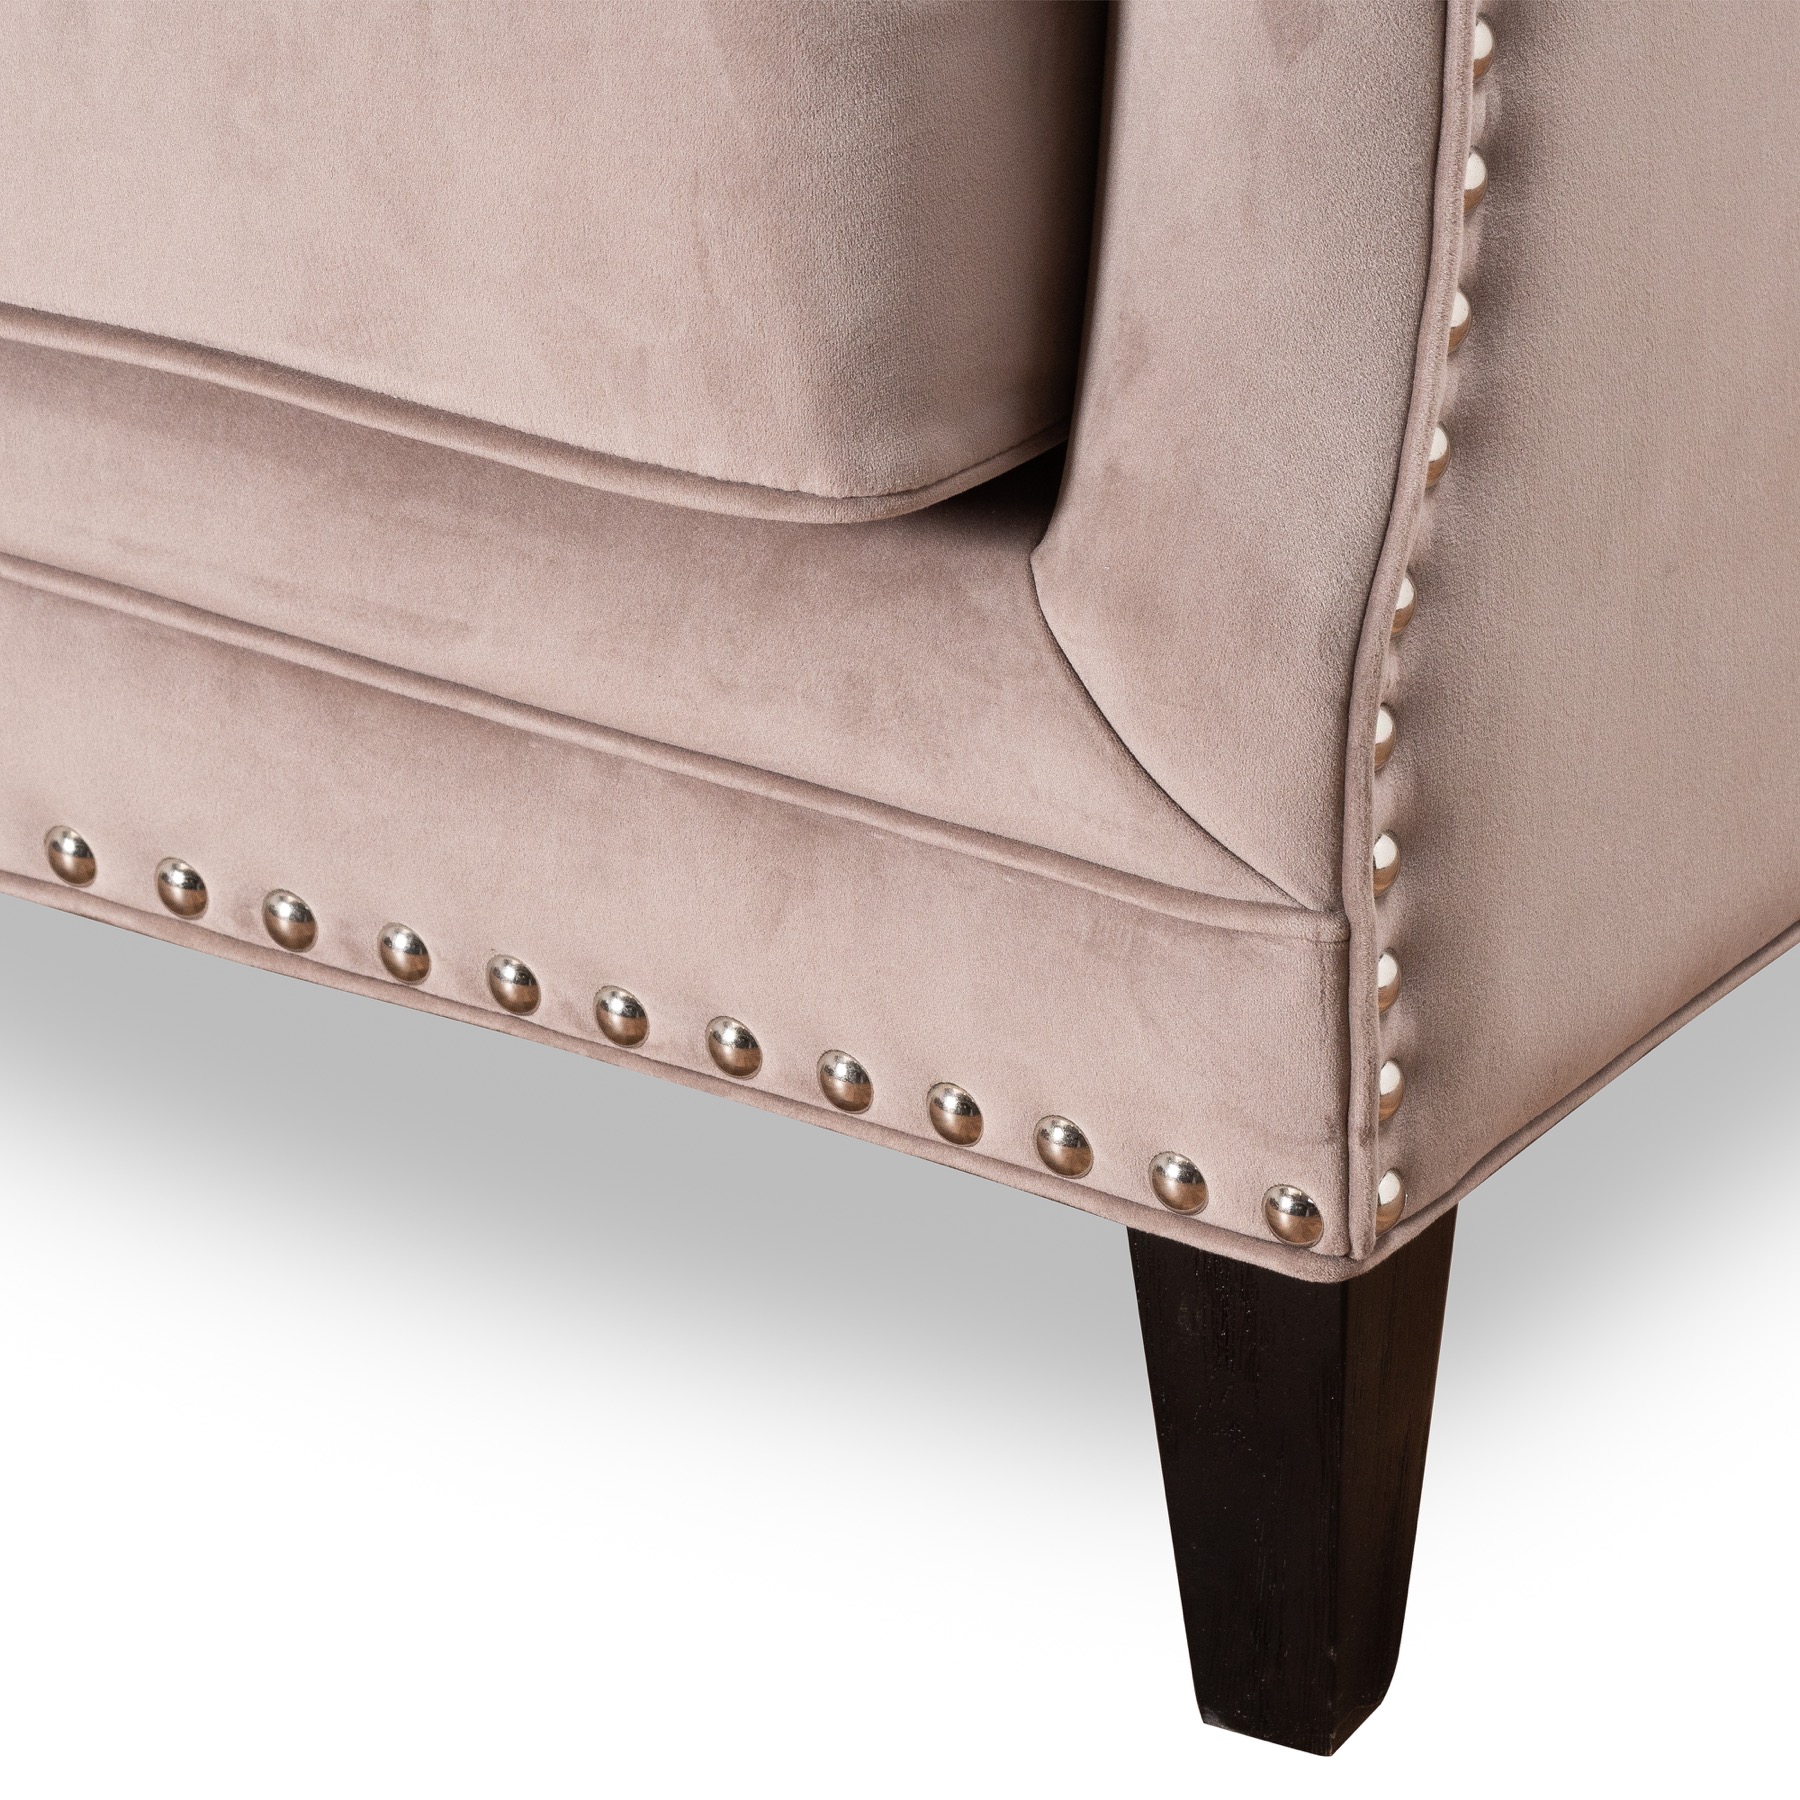 Chelsea Studded Chair - Image 3